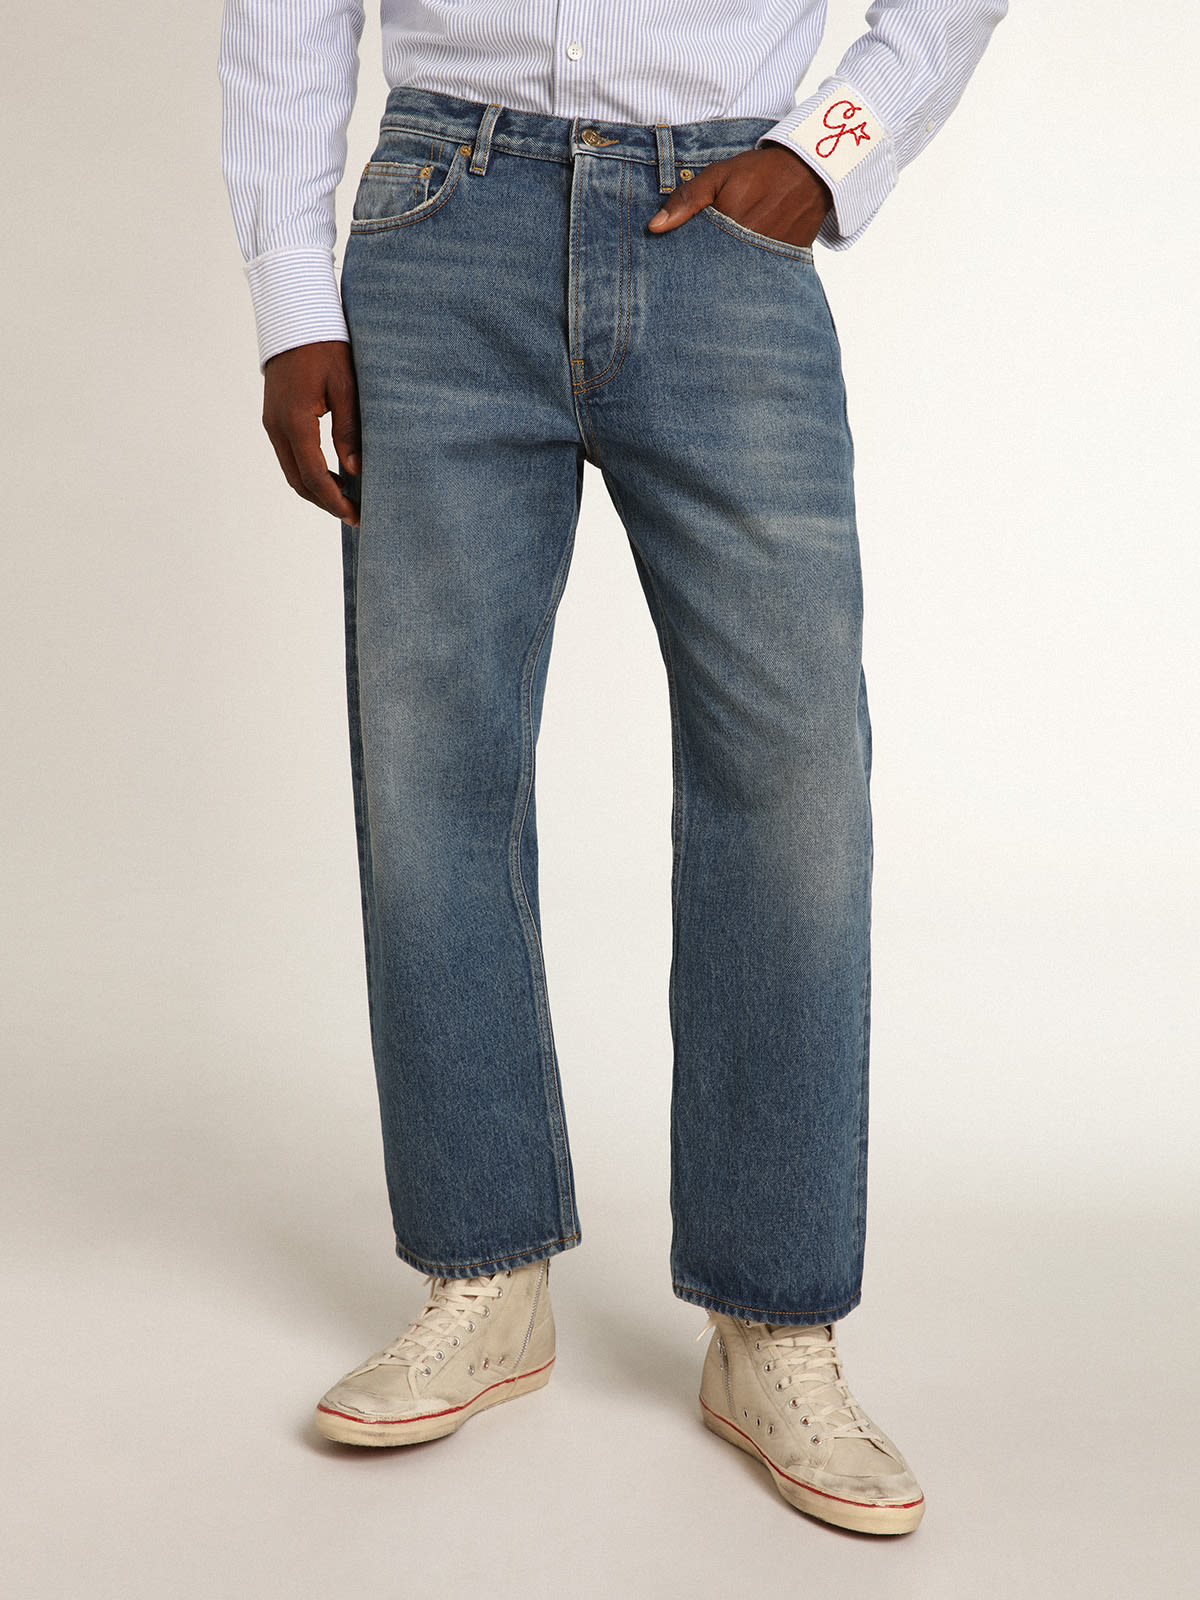 Golden Goose - Jeans blu dall'effetto stonewashed in 